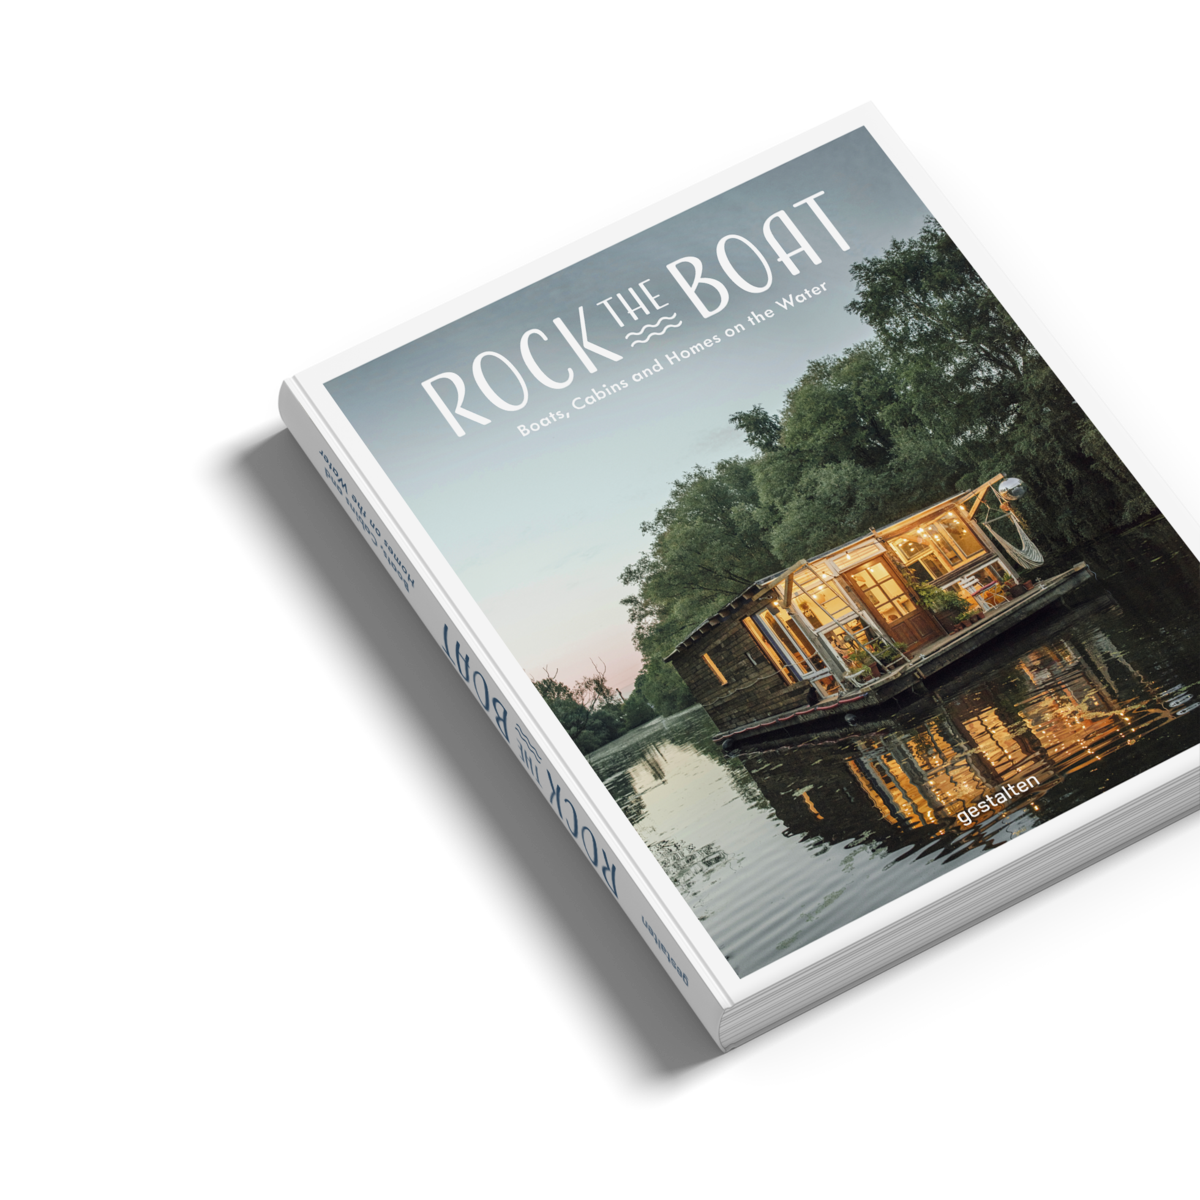 ROCK THE BOAT: BOATS, CABINS AND HOMES ON THE WATER - The Lake and Company